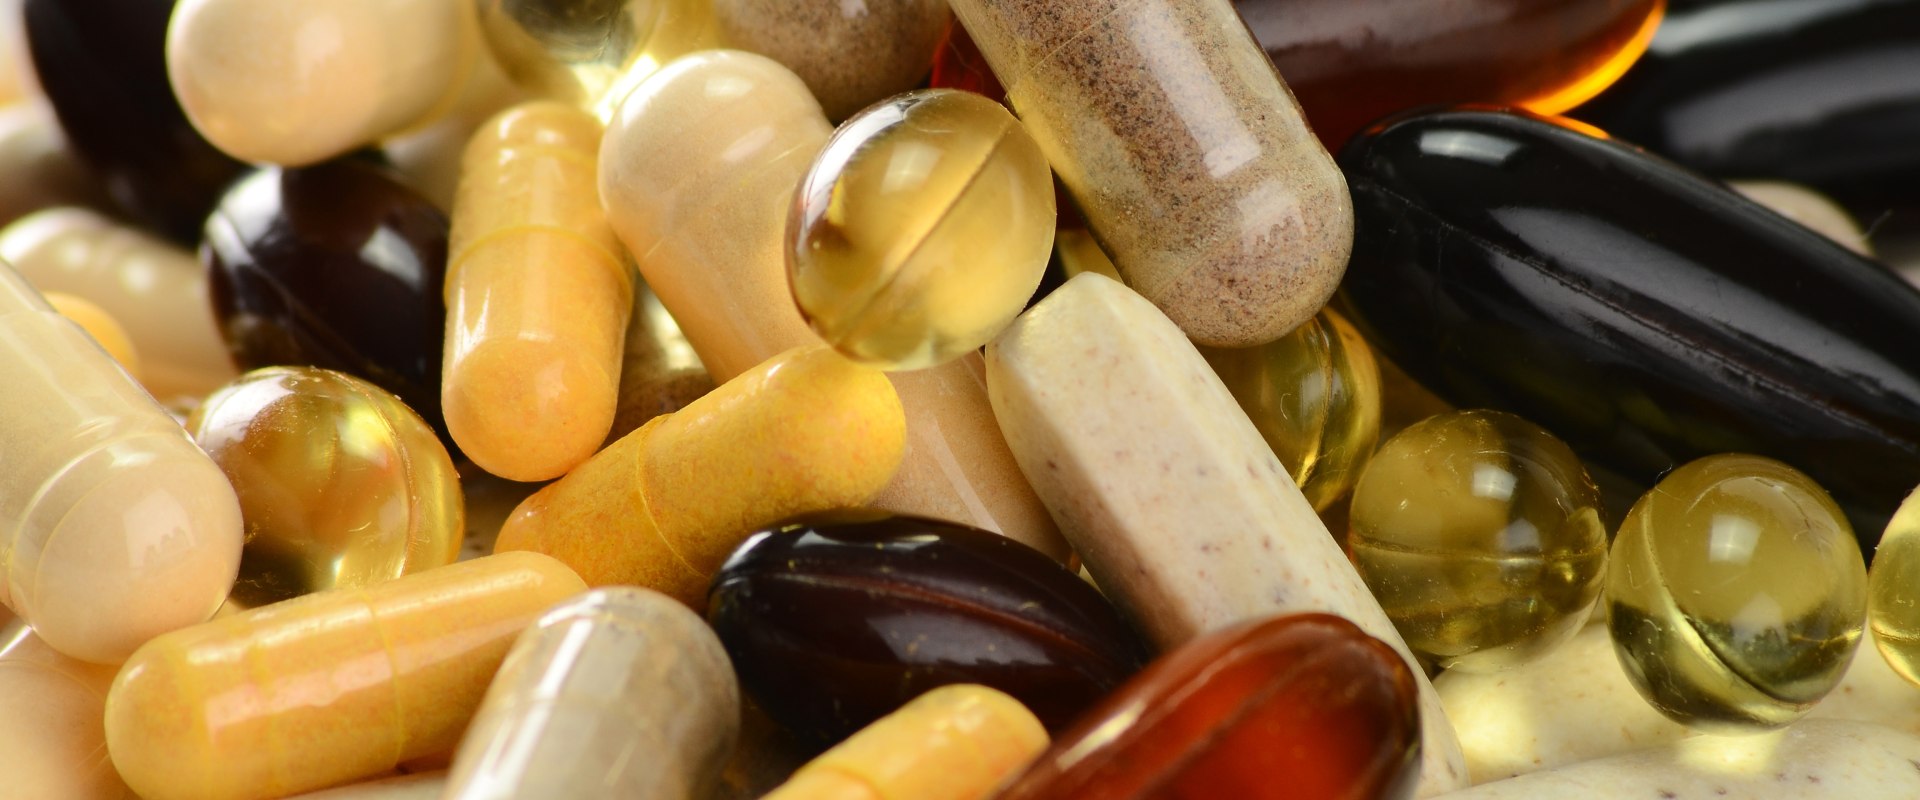 What Supplements Should Not Be Taken with Medication? A Comprehensive Guide